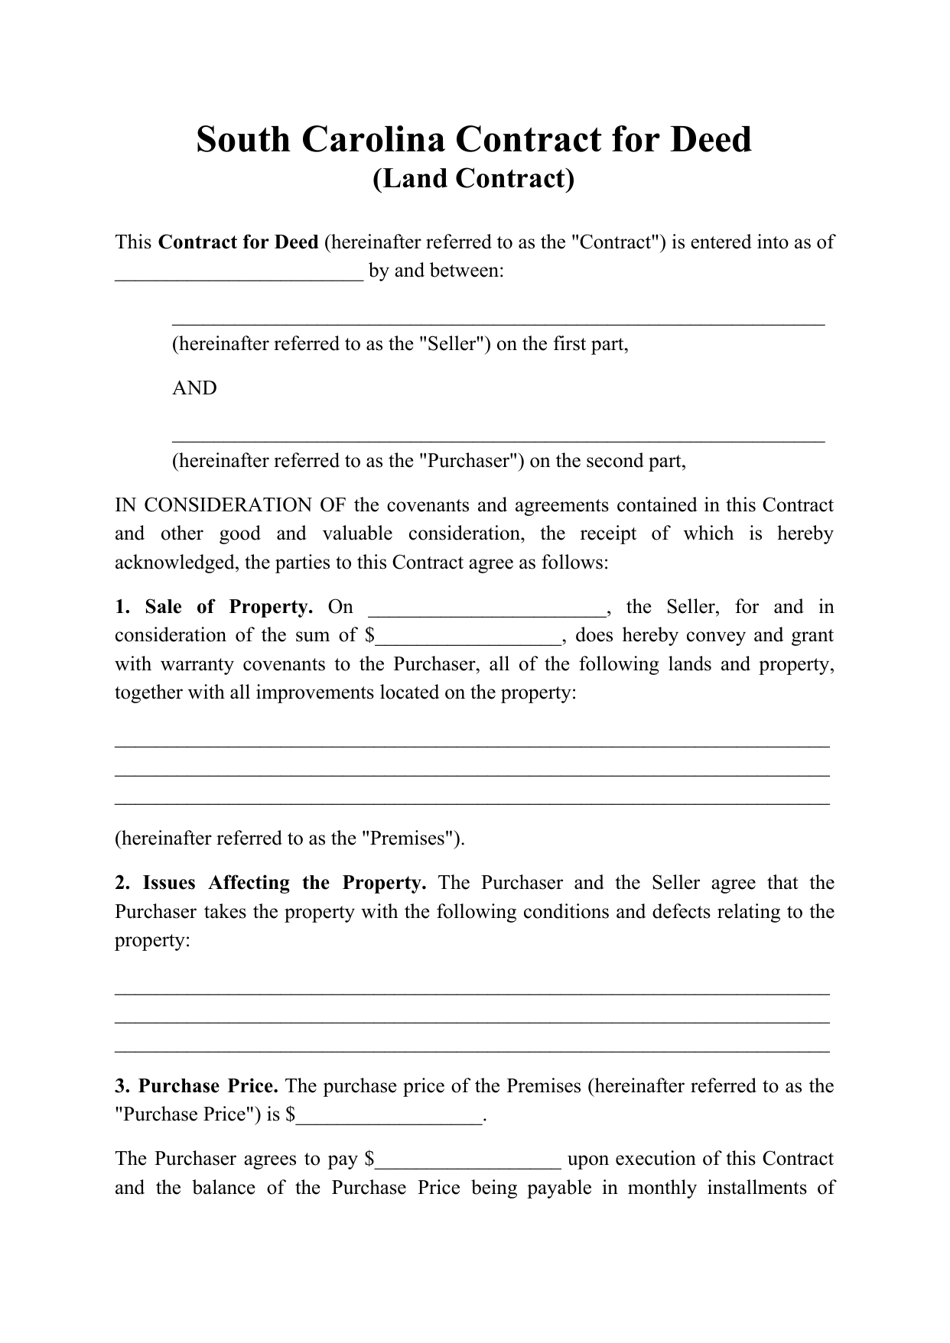 Contract for Deed (Land Contract) - South Carolina, Page 1